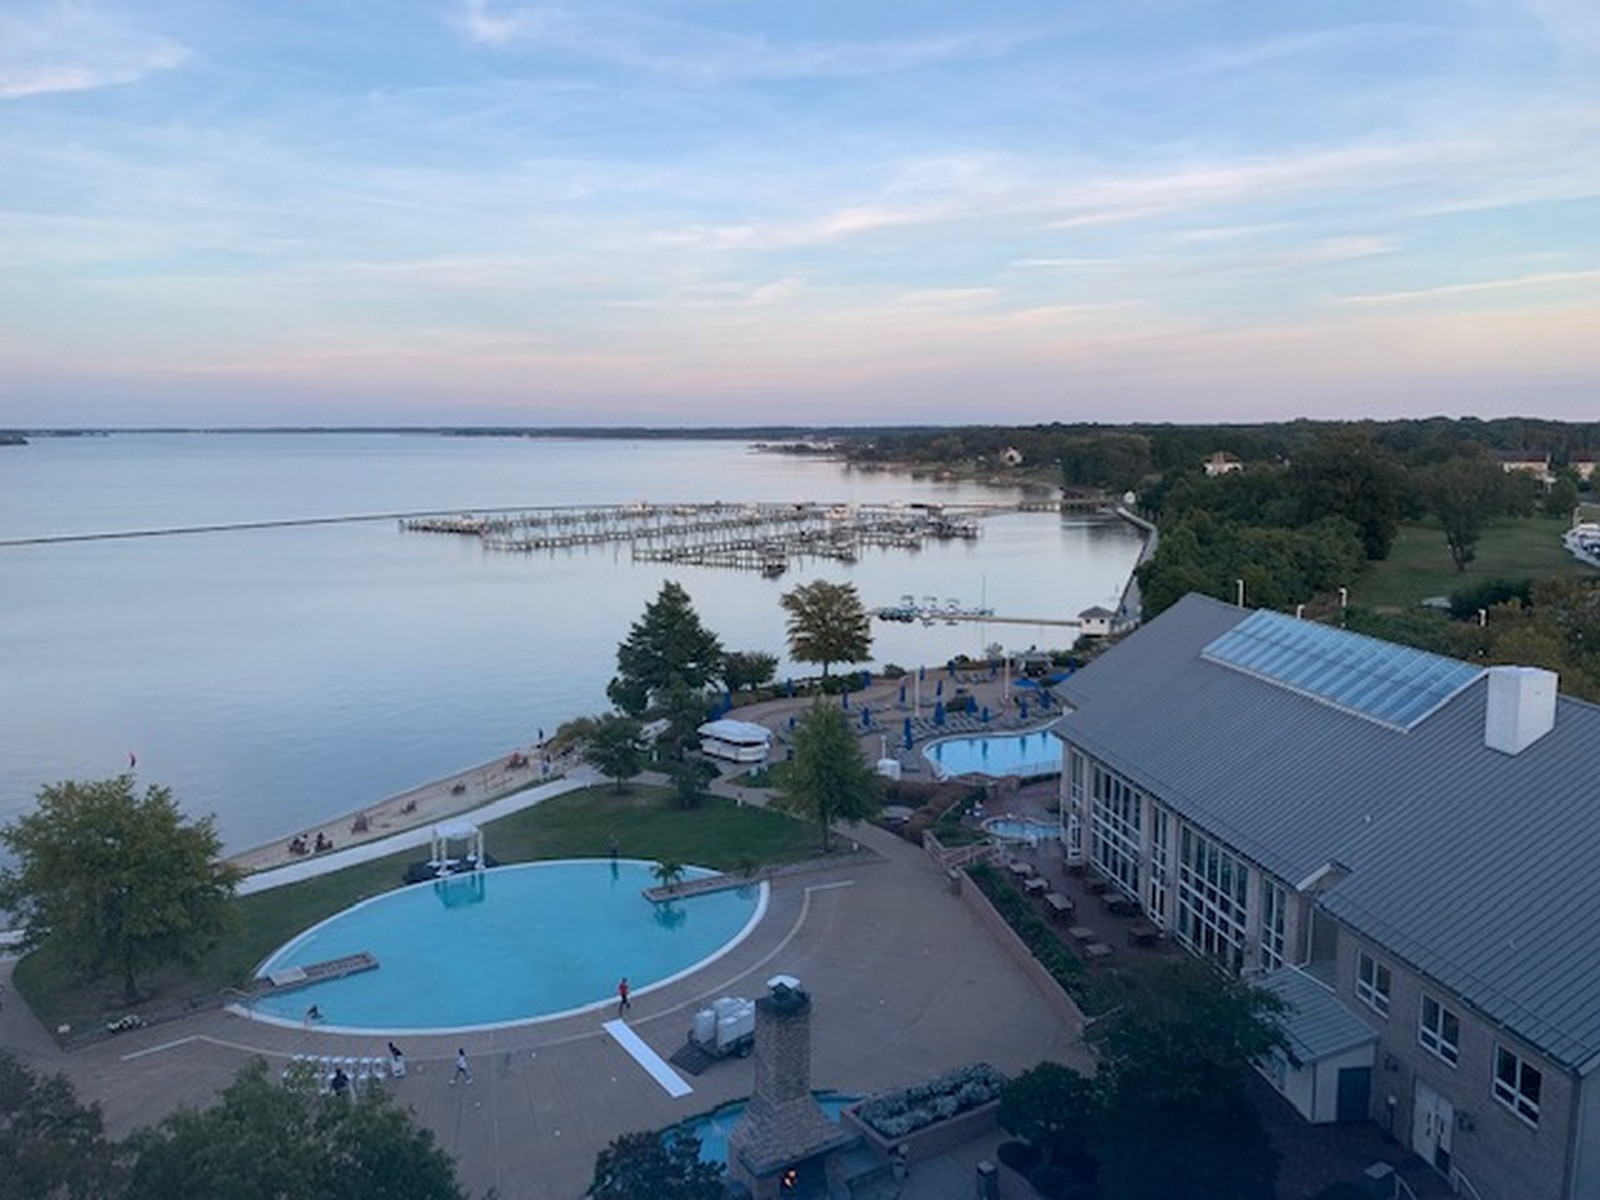 Hyatt Regency Chesapeake Bay Review: Why Is This Property So Divisive?